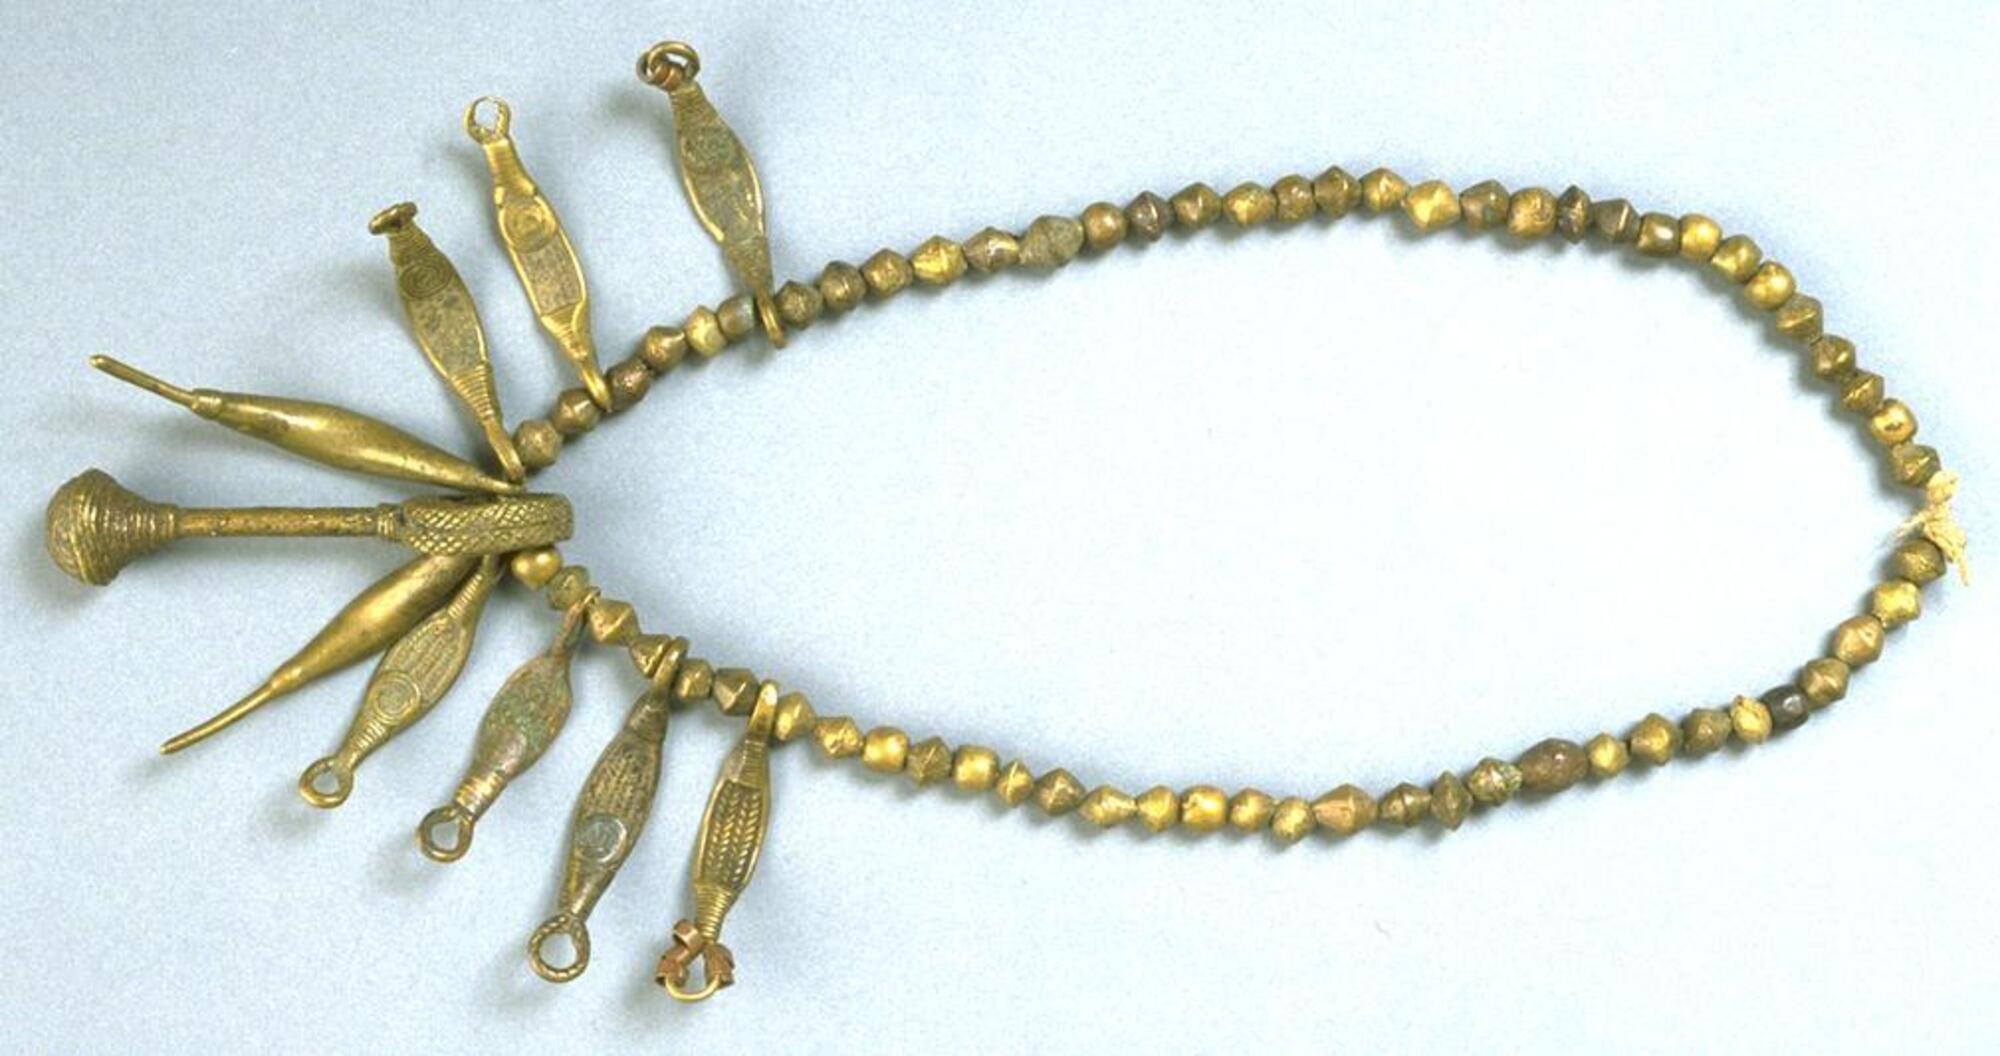 Belt made of brass beads with brass pendants. The central pendant is in the form of a crotal bell attached to a short rod with a large suspension loop. Two pendants are curved forms and the other seven are in the shape of what have been described as banana leaves. 